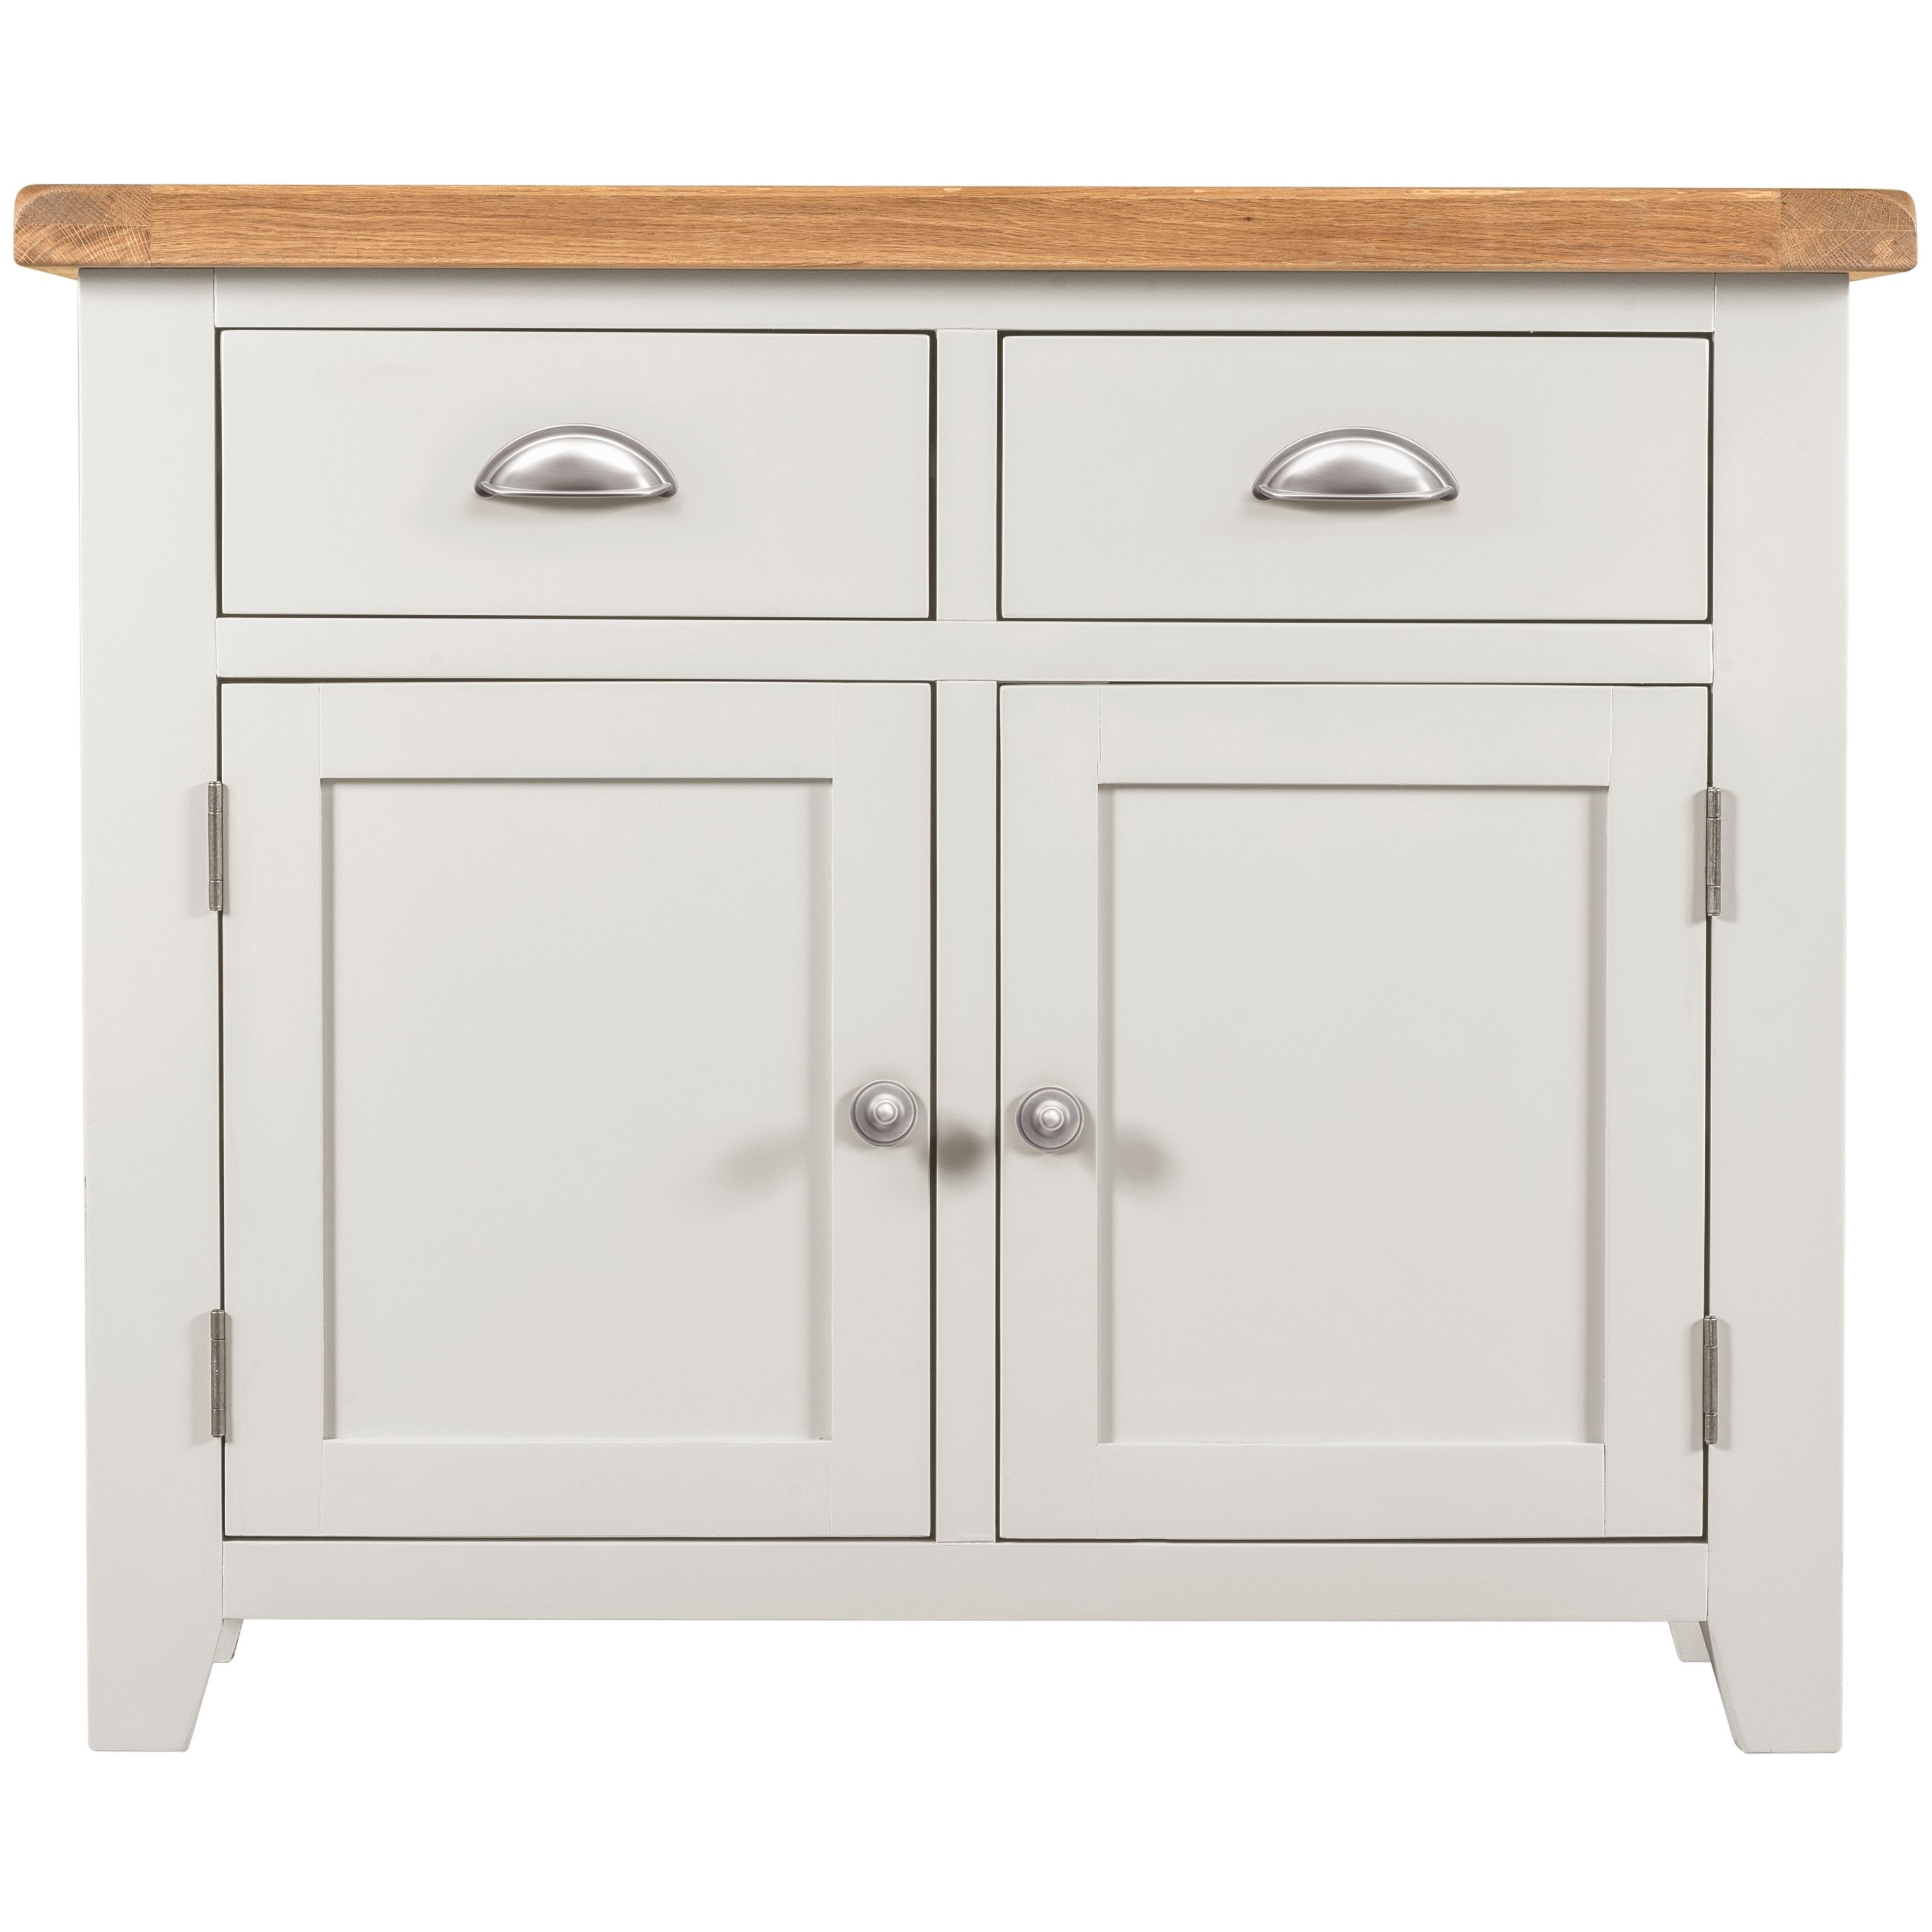 Willow White 2 Door 2 Drawer Sideboard | The Haven Home Interiors With Regard To Most Current 2 Drawer Sideboards (View 8 of 20)